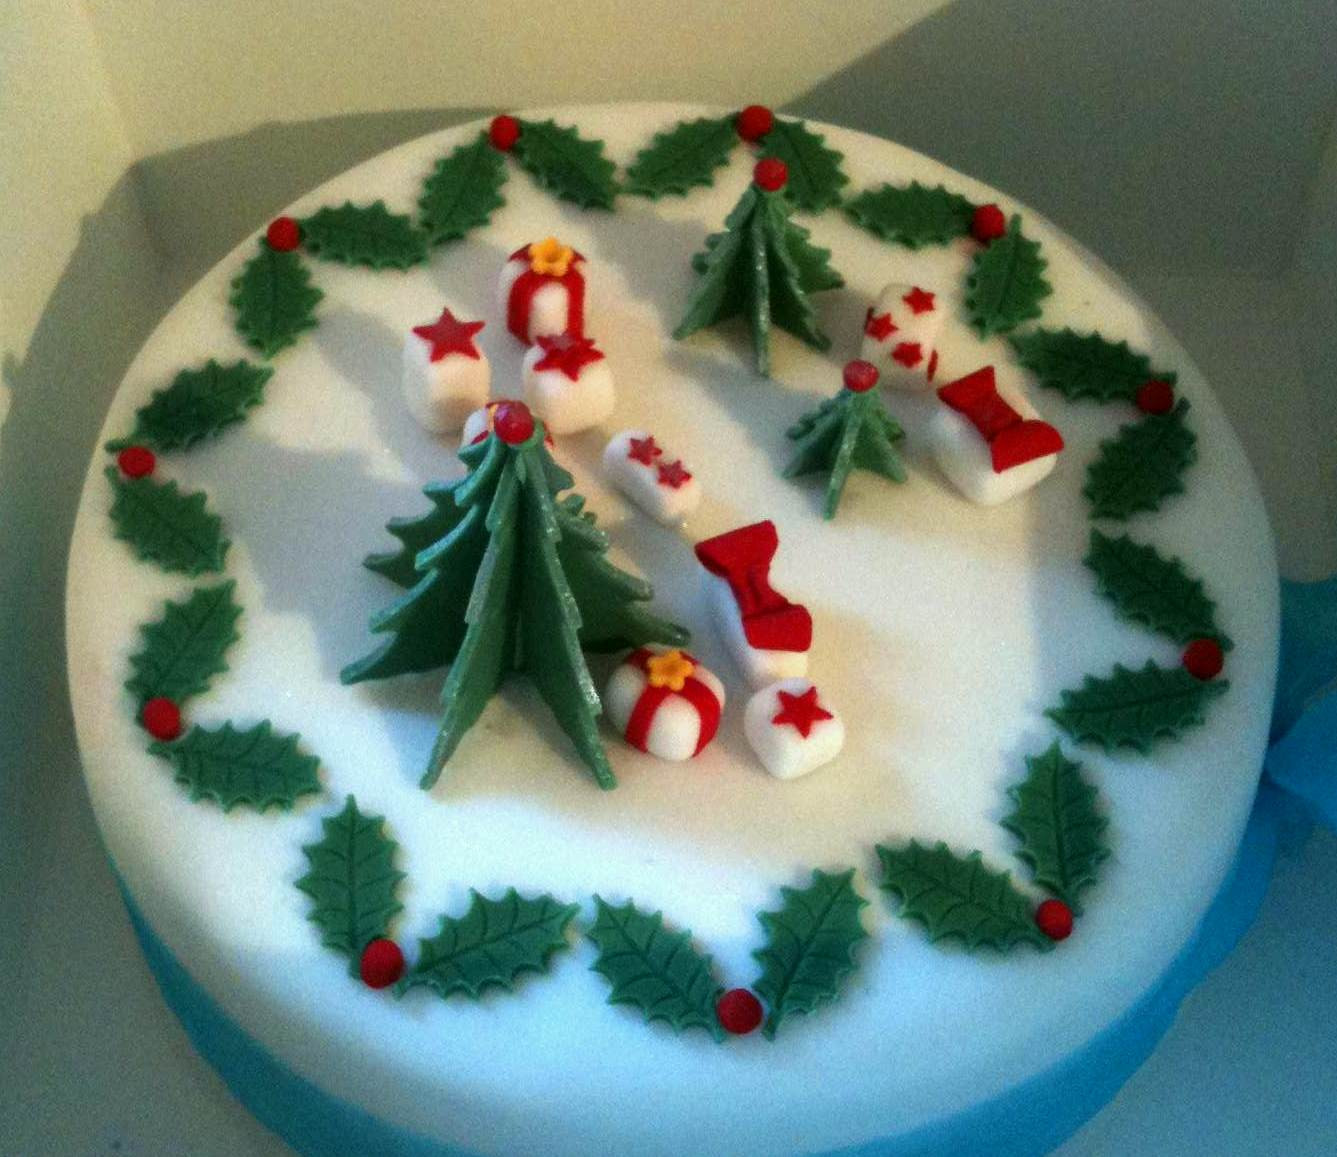 Images Of Christmas Cakes Decorated
 Pool Christmas Cakes